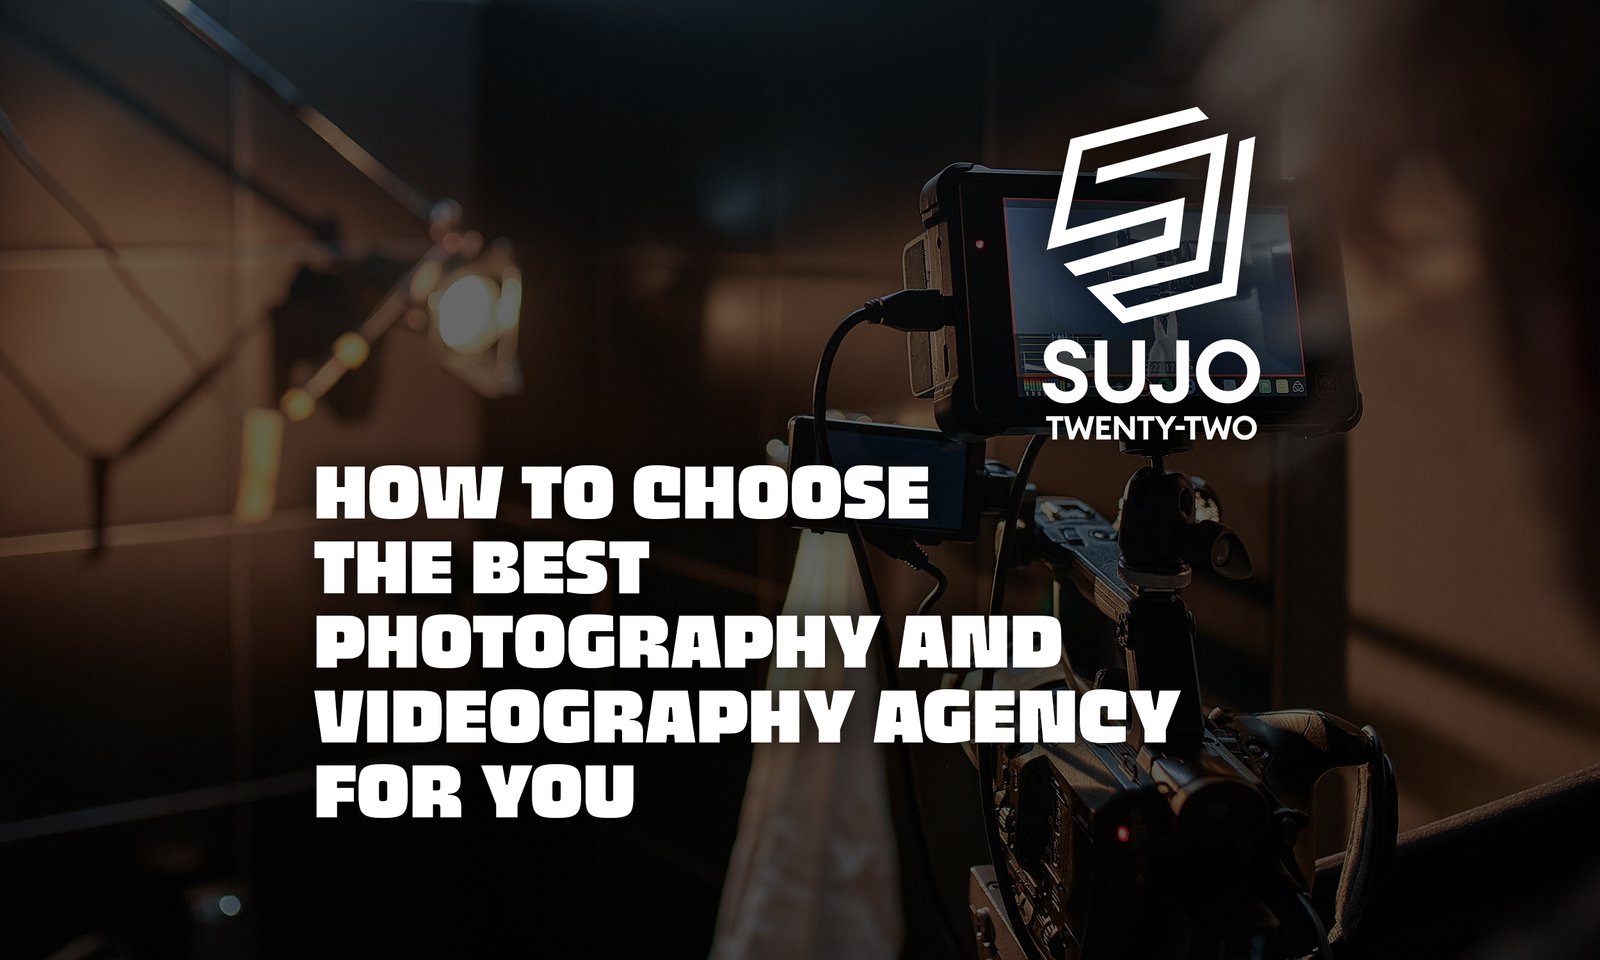 How To Choose The Best Photography And Videography Agency For You | SUJO TWENTY-TWO